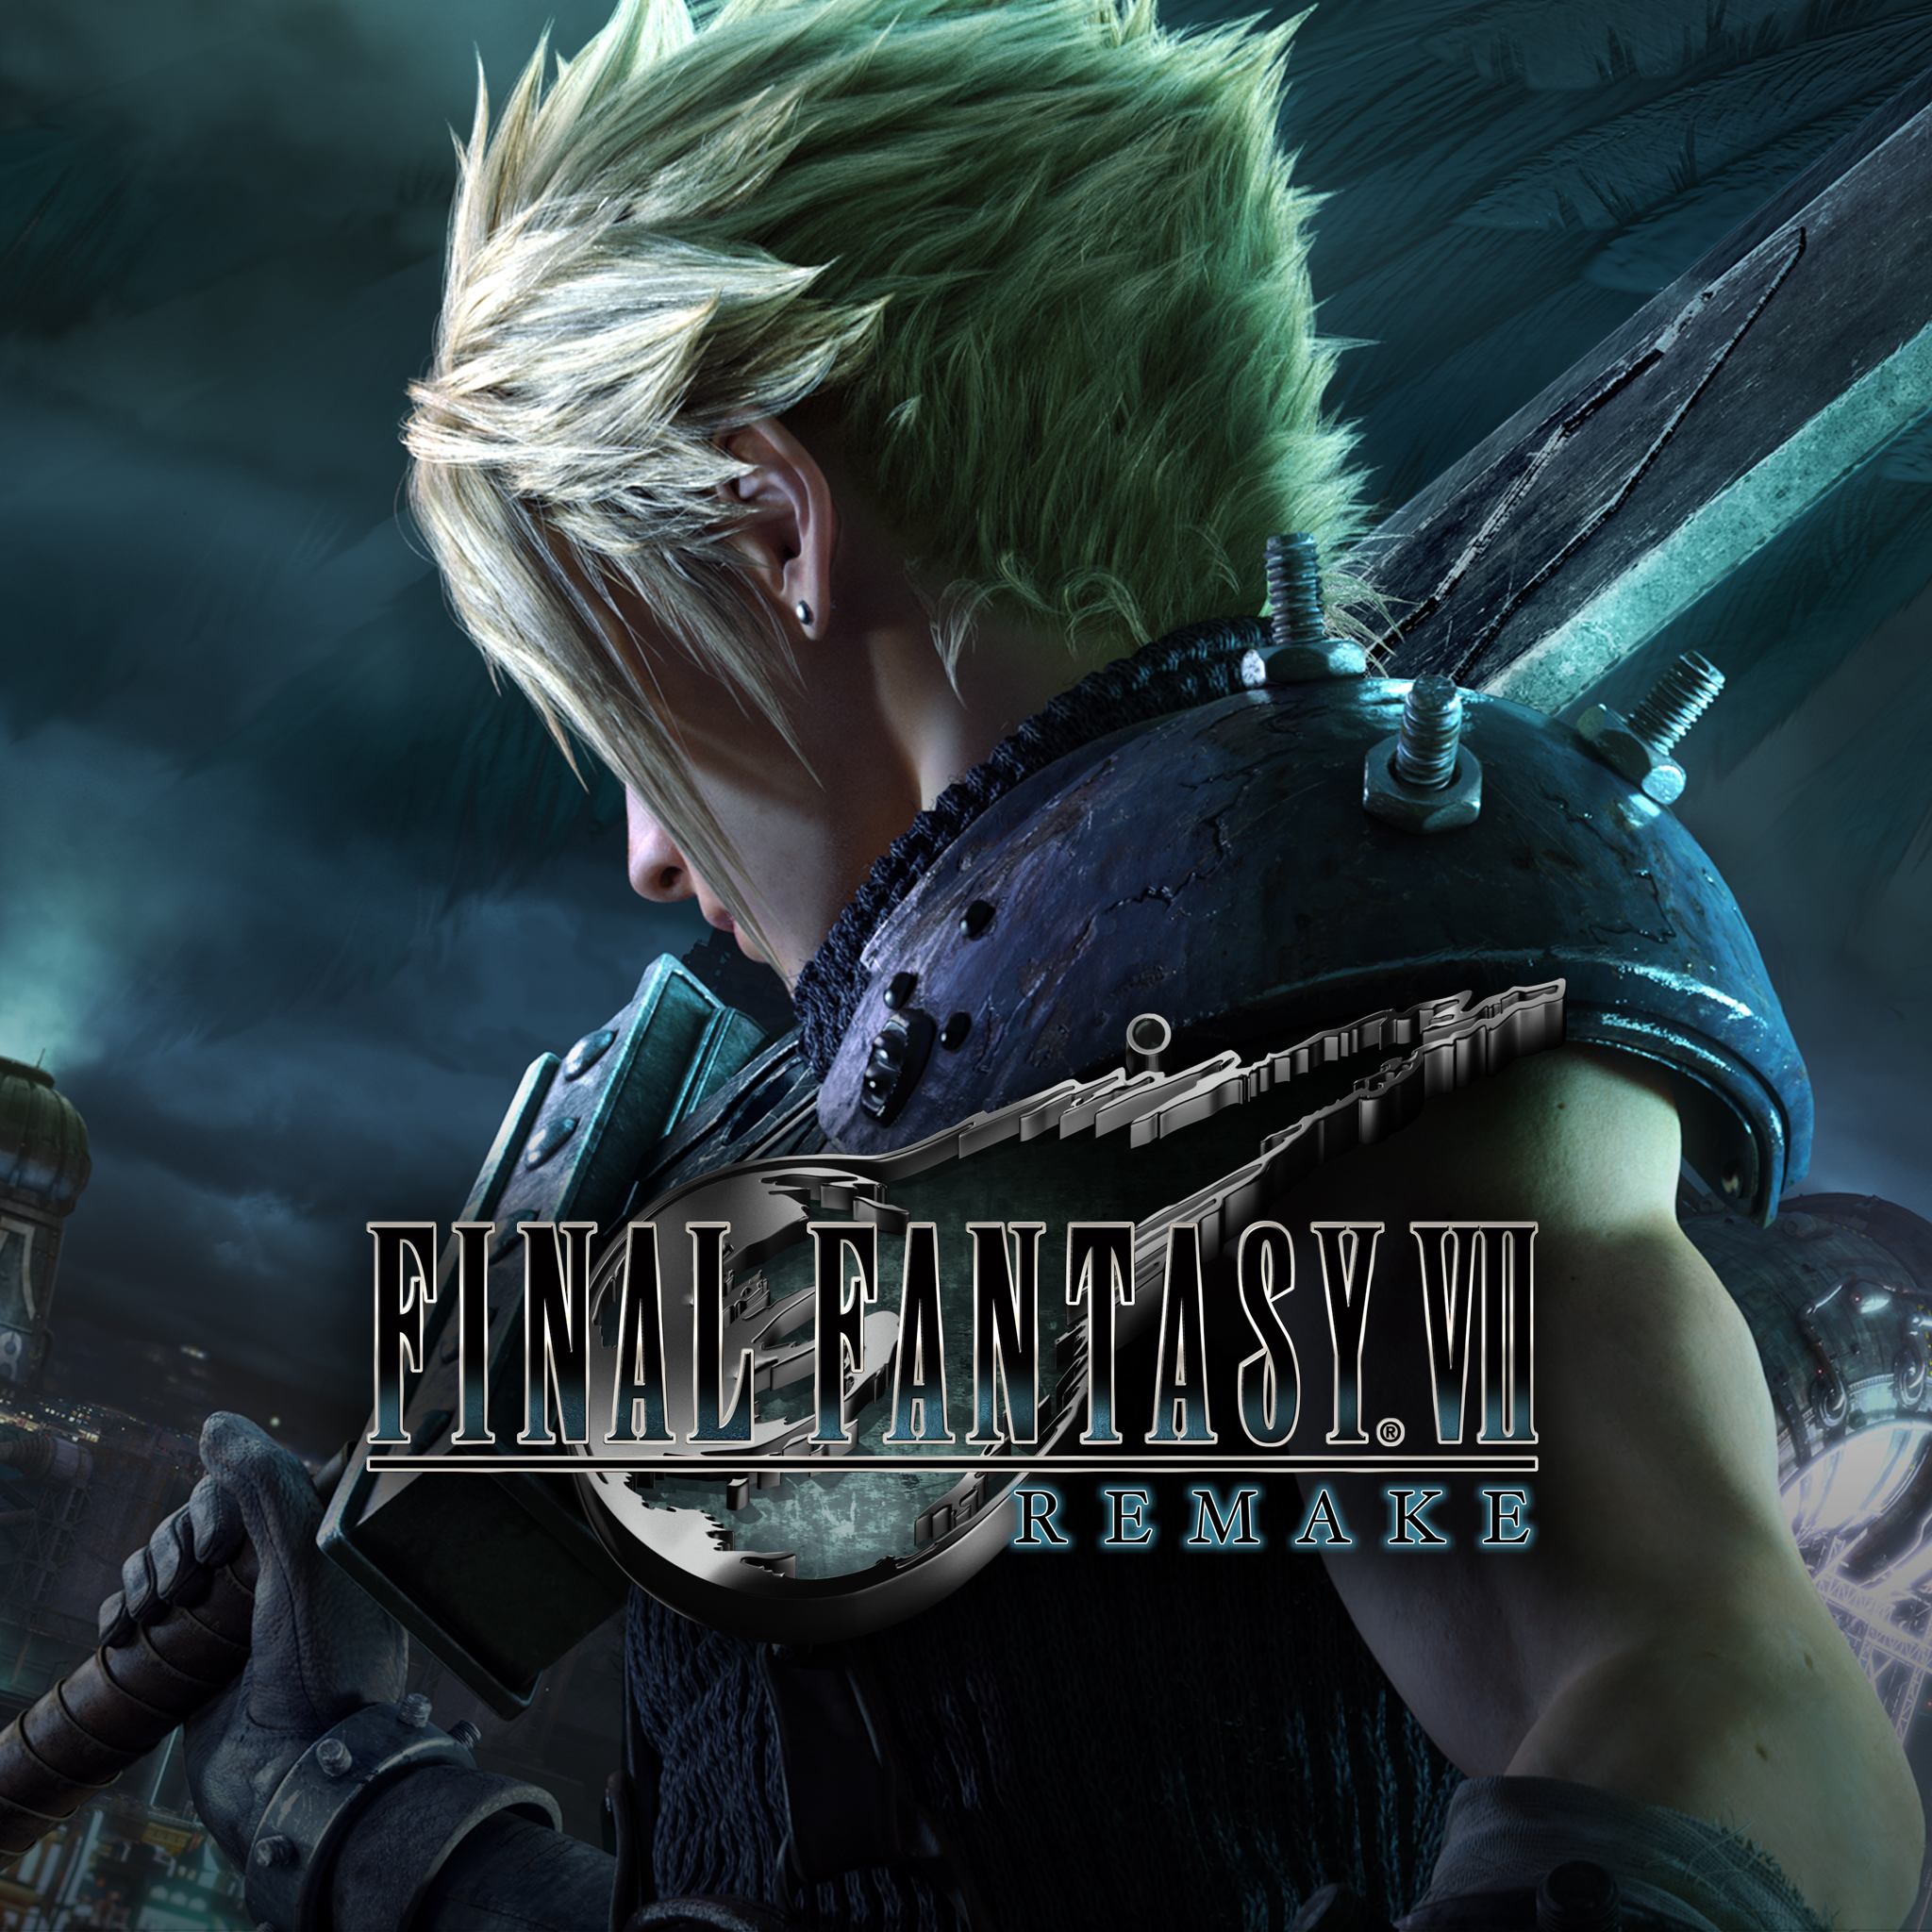 Final Fantasy Vii Remake Ps4 Price And Sale History Get 50 Discount